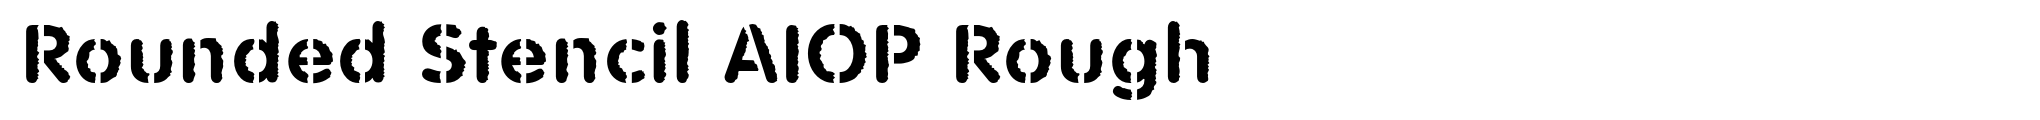 Rounded Stencil AIOP Rough image